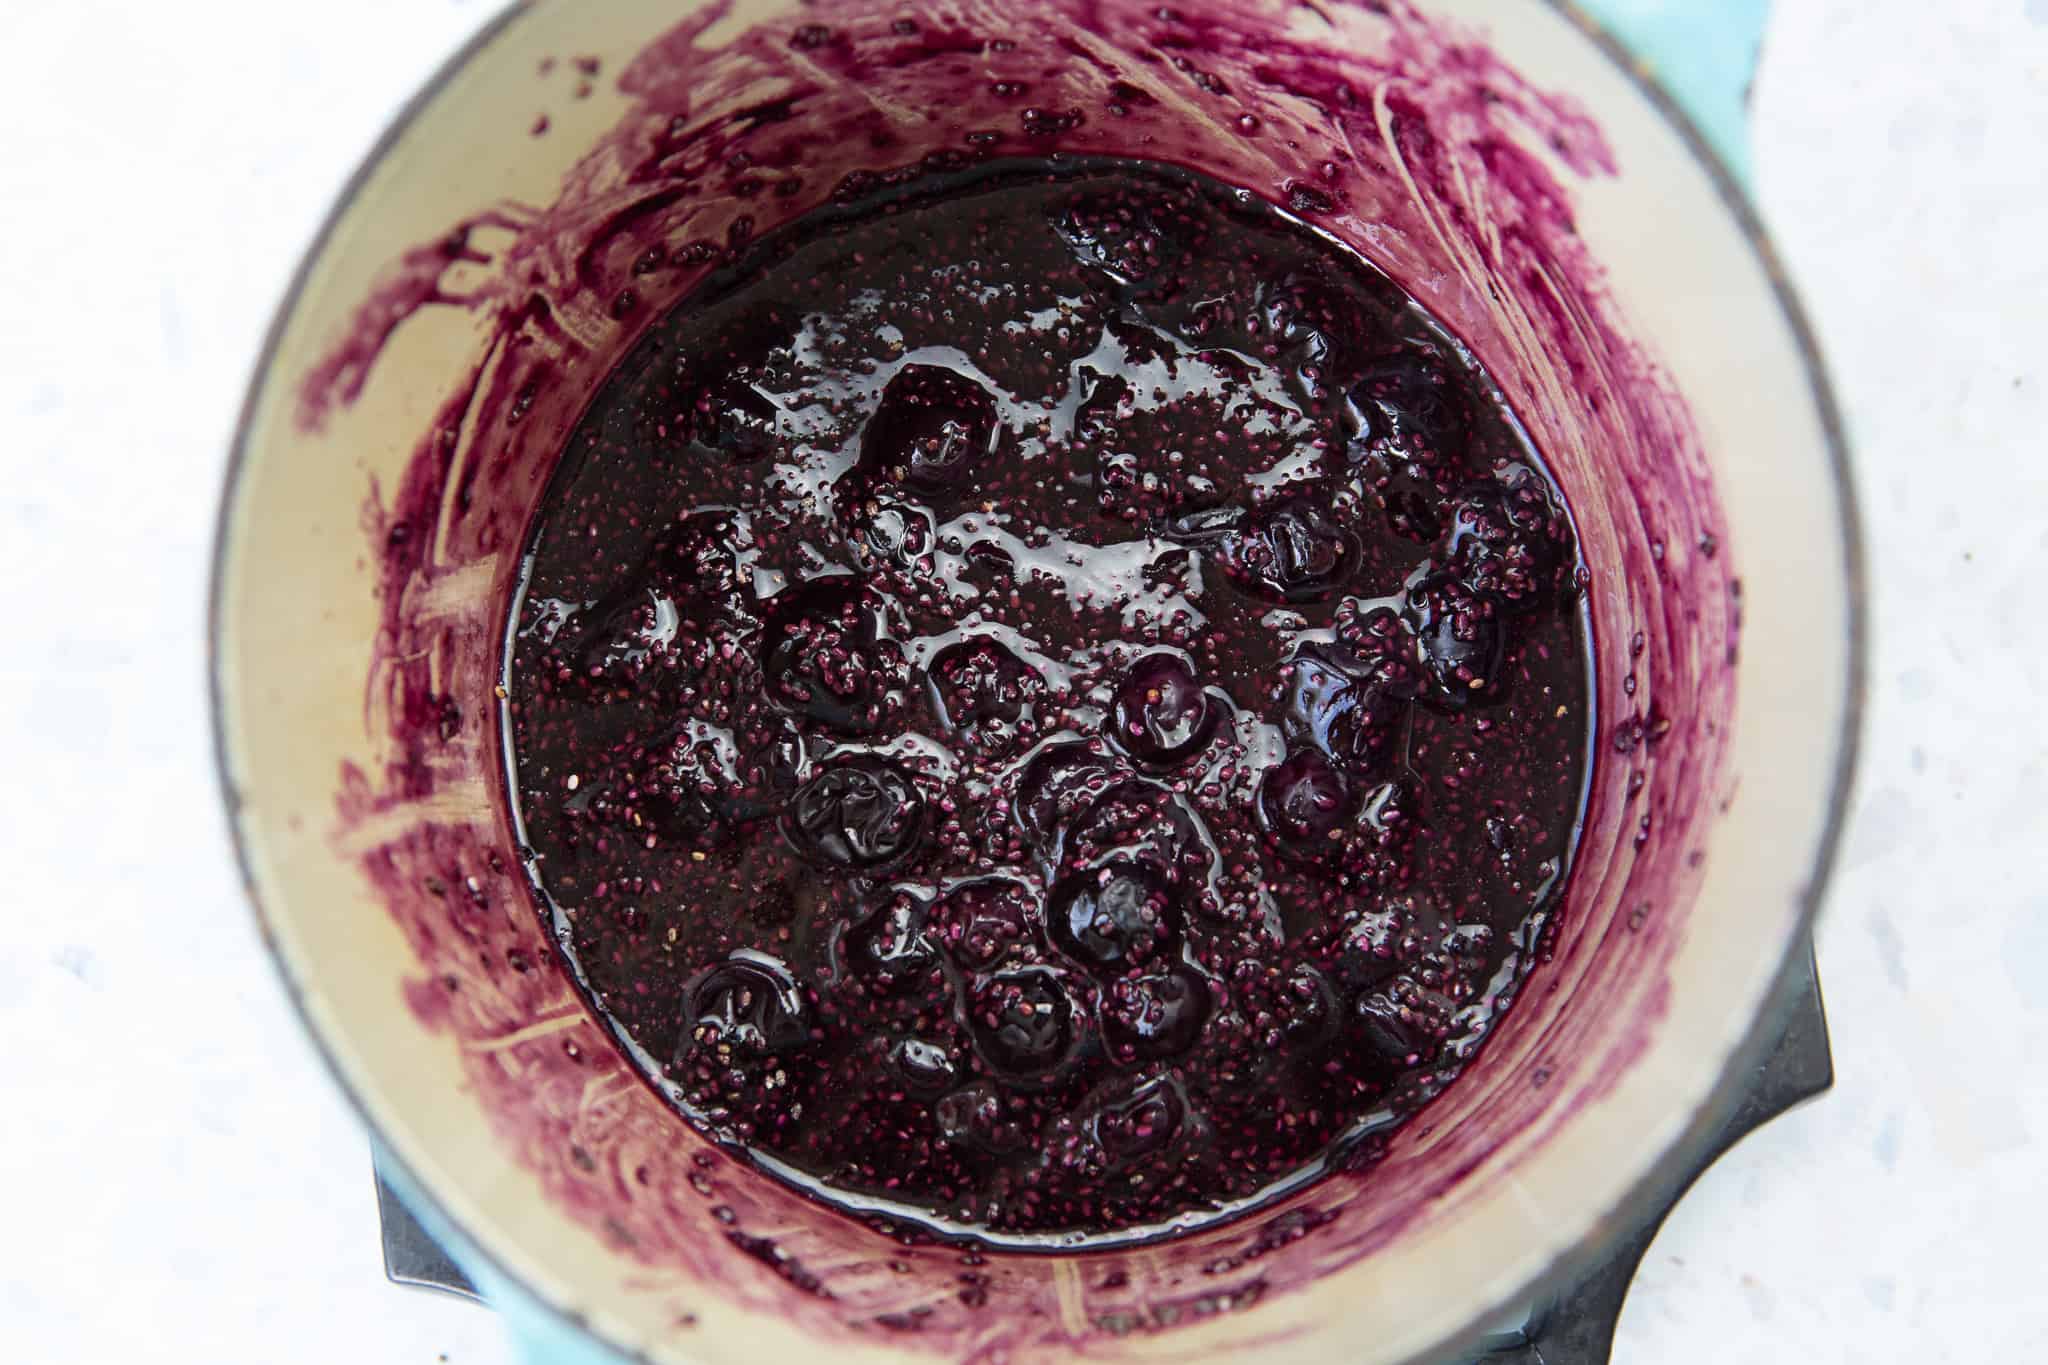 blueberry jam fully cooked and ready